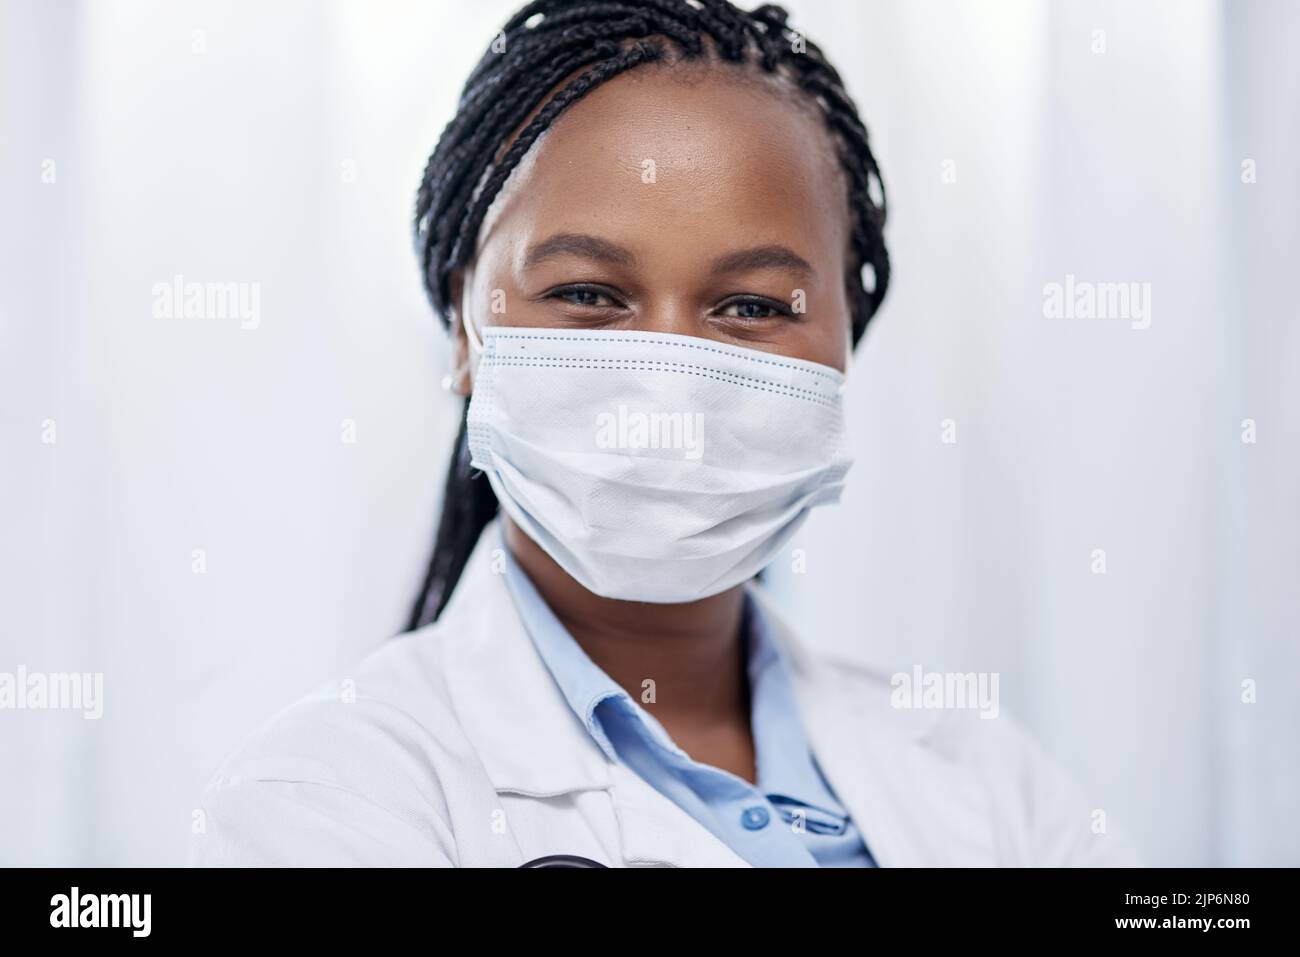 Doctor wearing hygiene face mask for covid, safety and precaution in the healthcare industry. Portrait and face of confident black medical Stock Photo